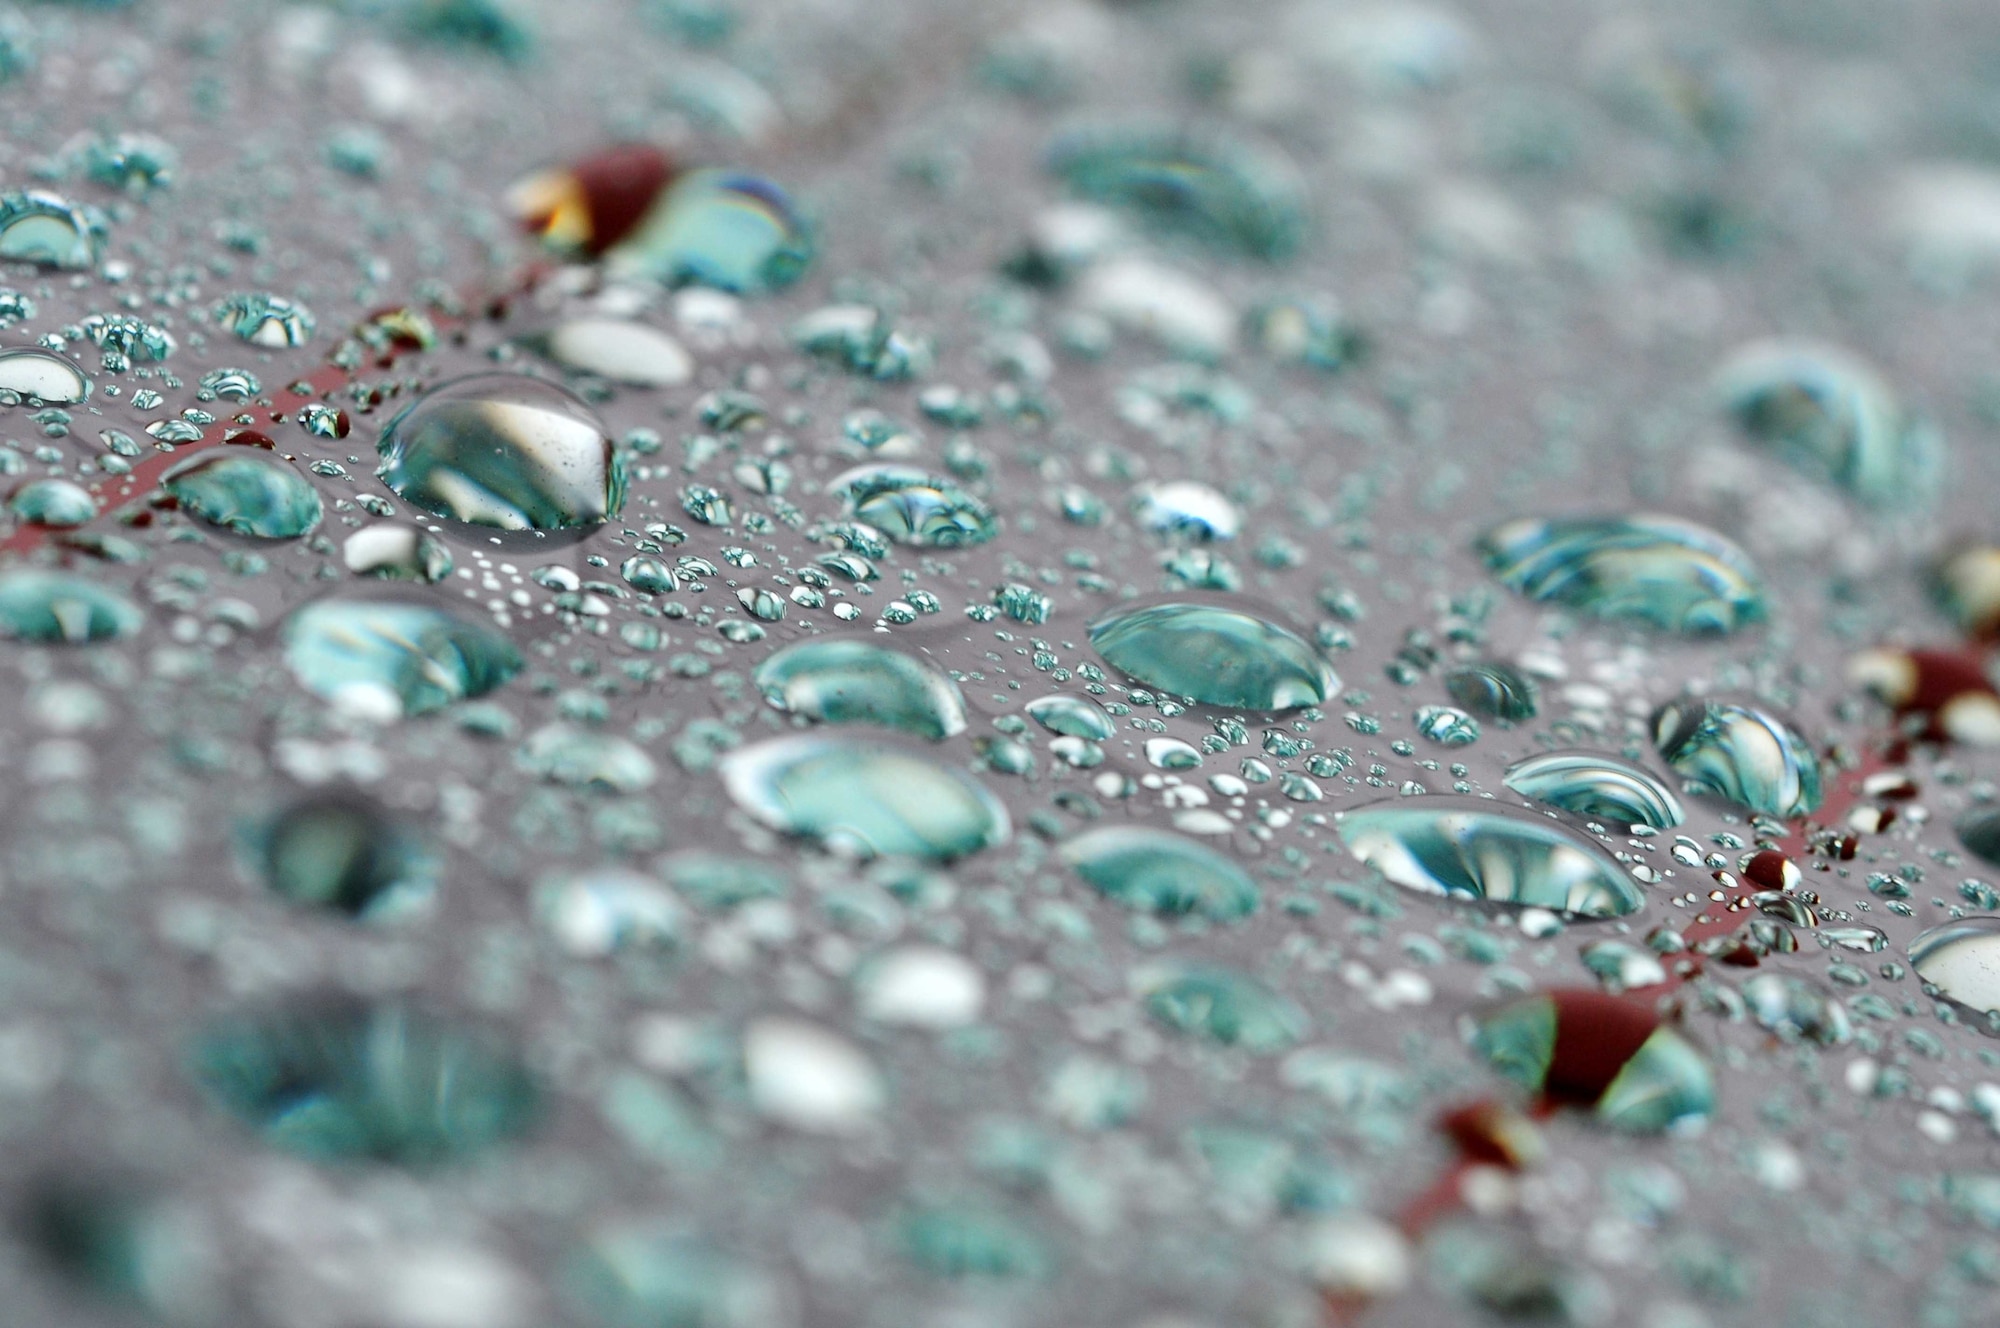 According to British folklore, if it rains on July 15, St. Swithin’s Day, it means we can expect 40 more days of rain. 